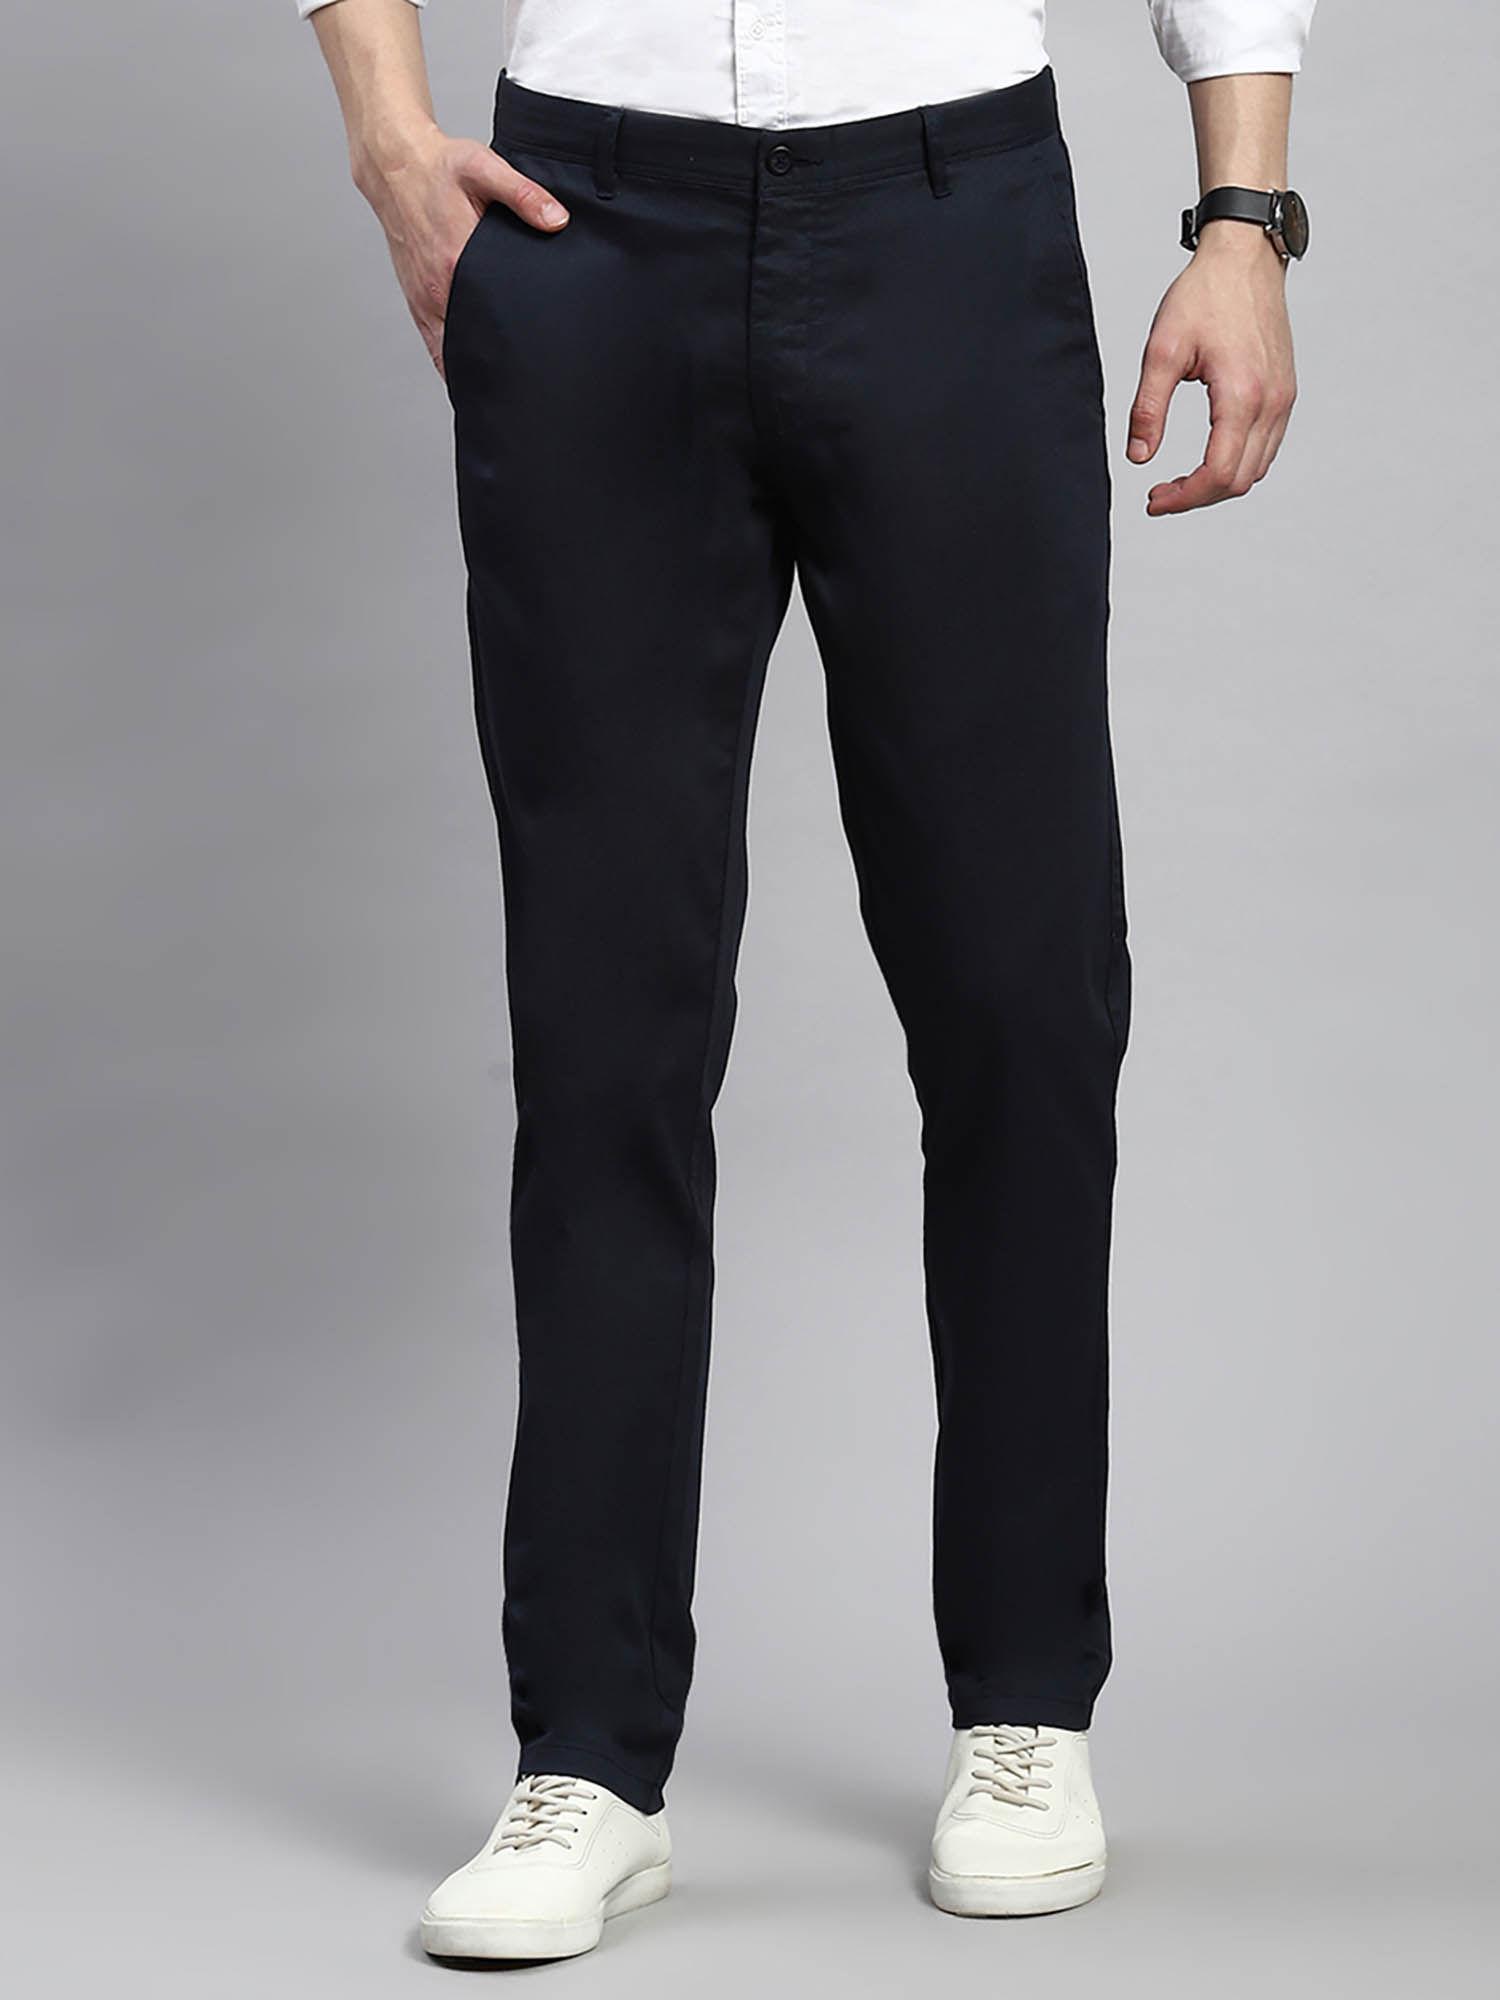 navy blue solid regular fit casual trouser